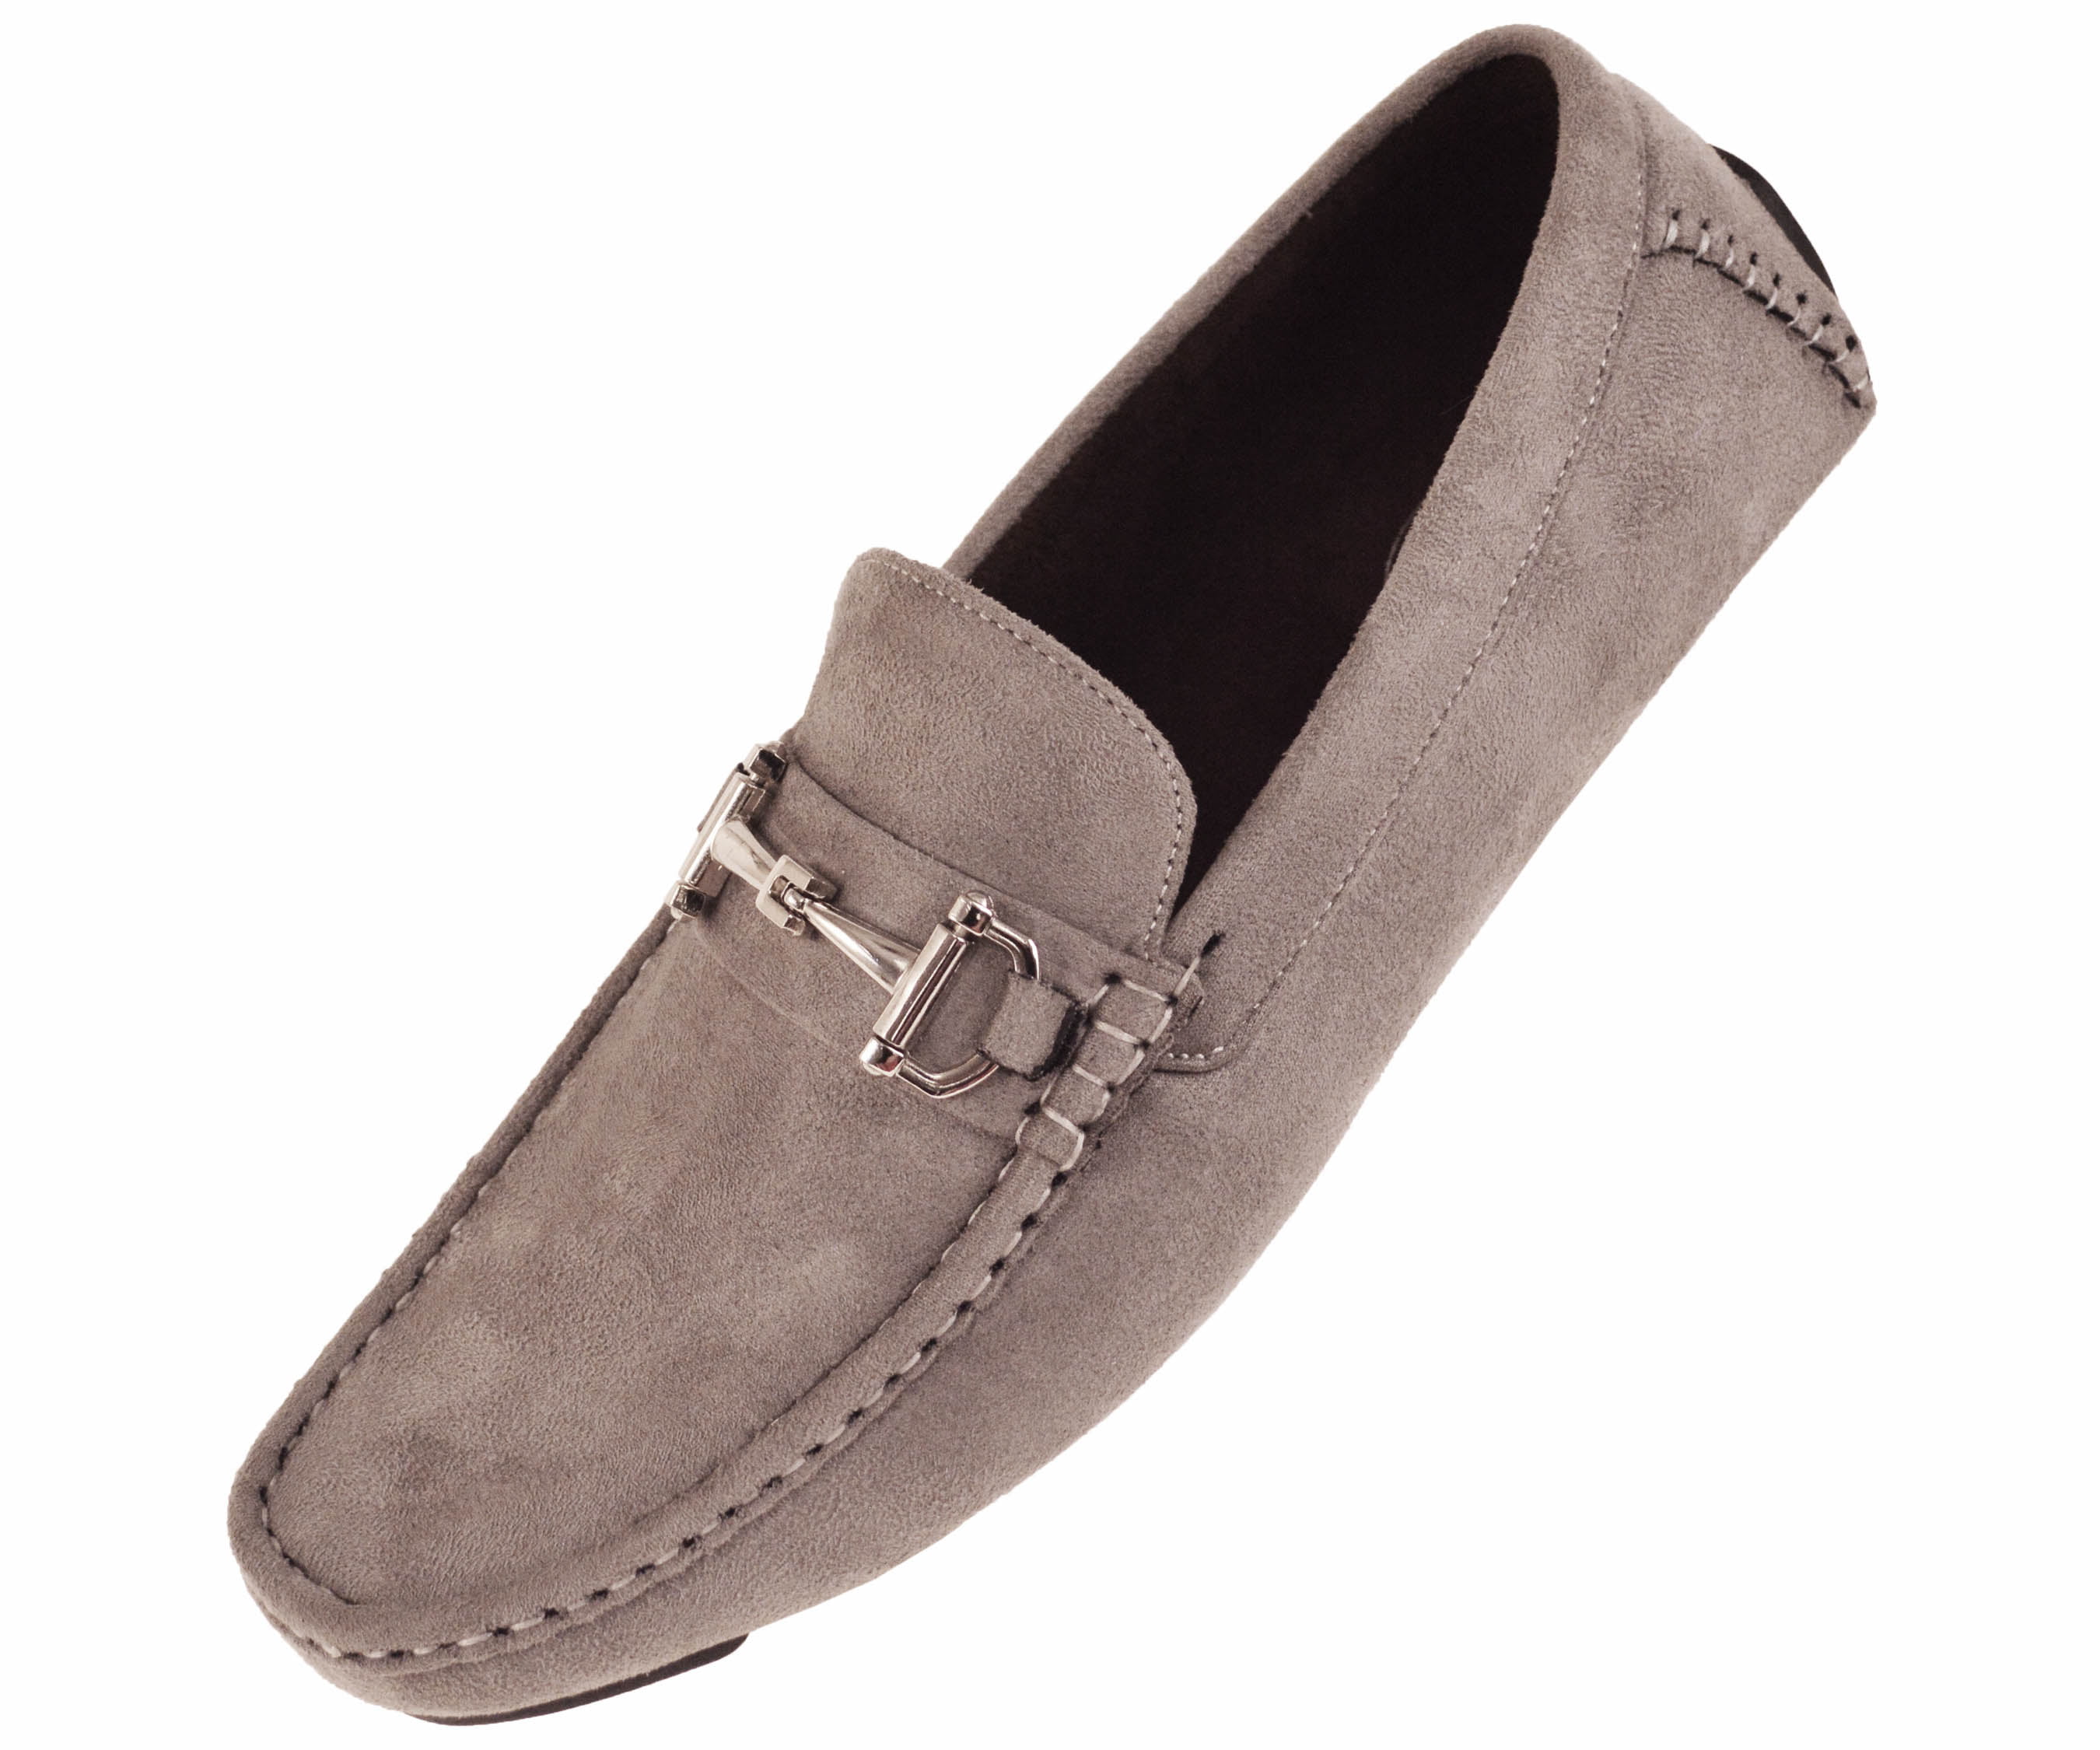 Textured Slip On Moccasins Buckle Loafers Boat Driving Shoes Mens Size 